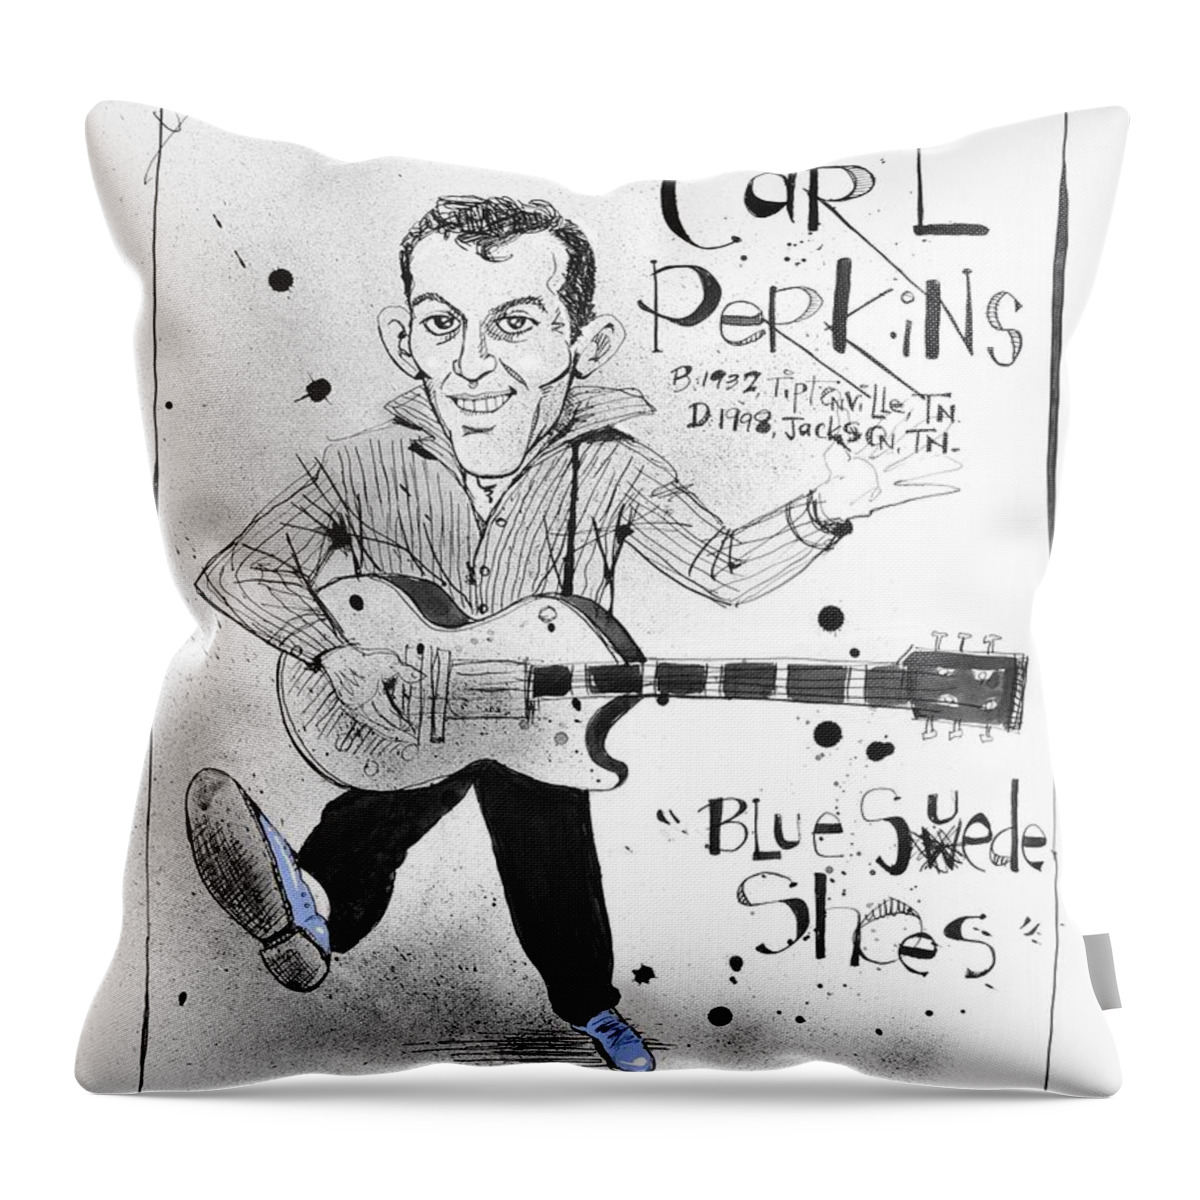  Throw Pillow featuring the drawing Carl Perkins by Phil Mckenney